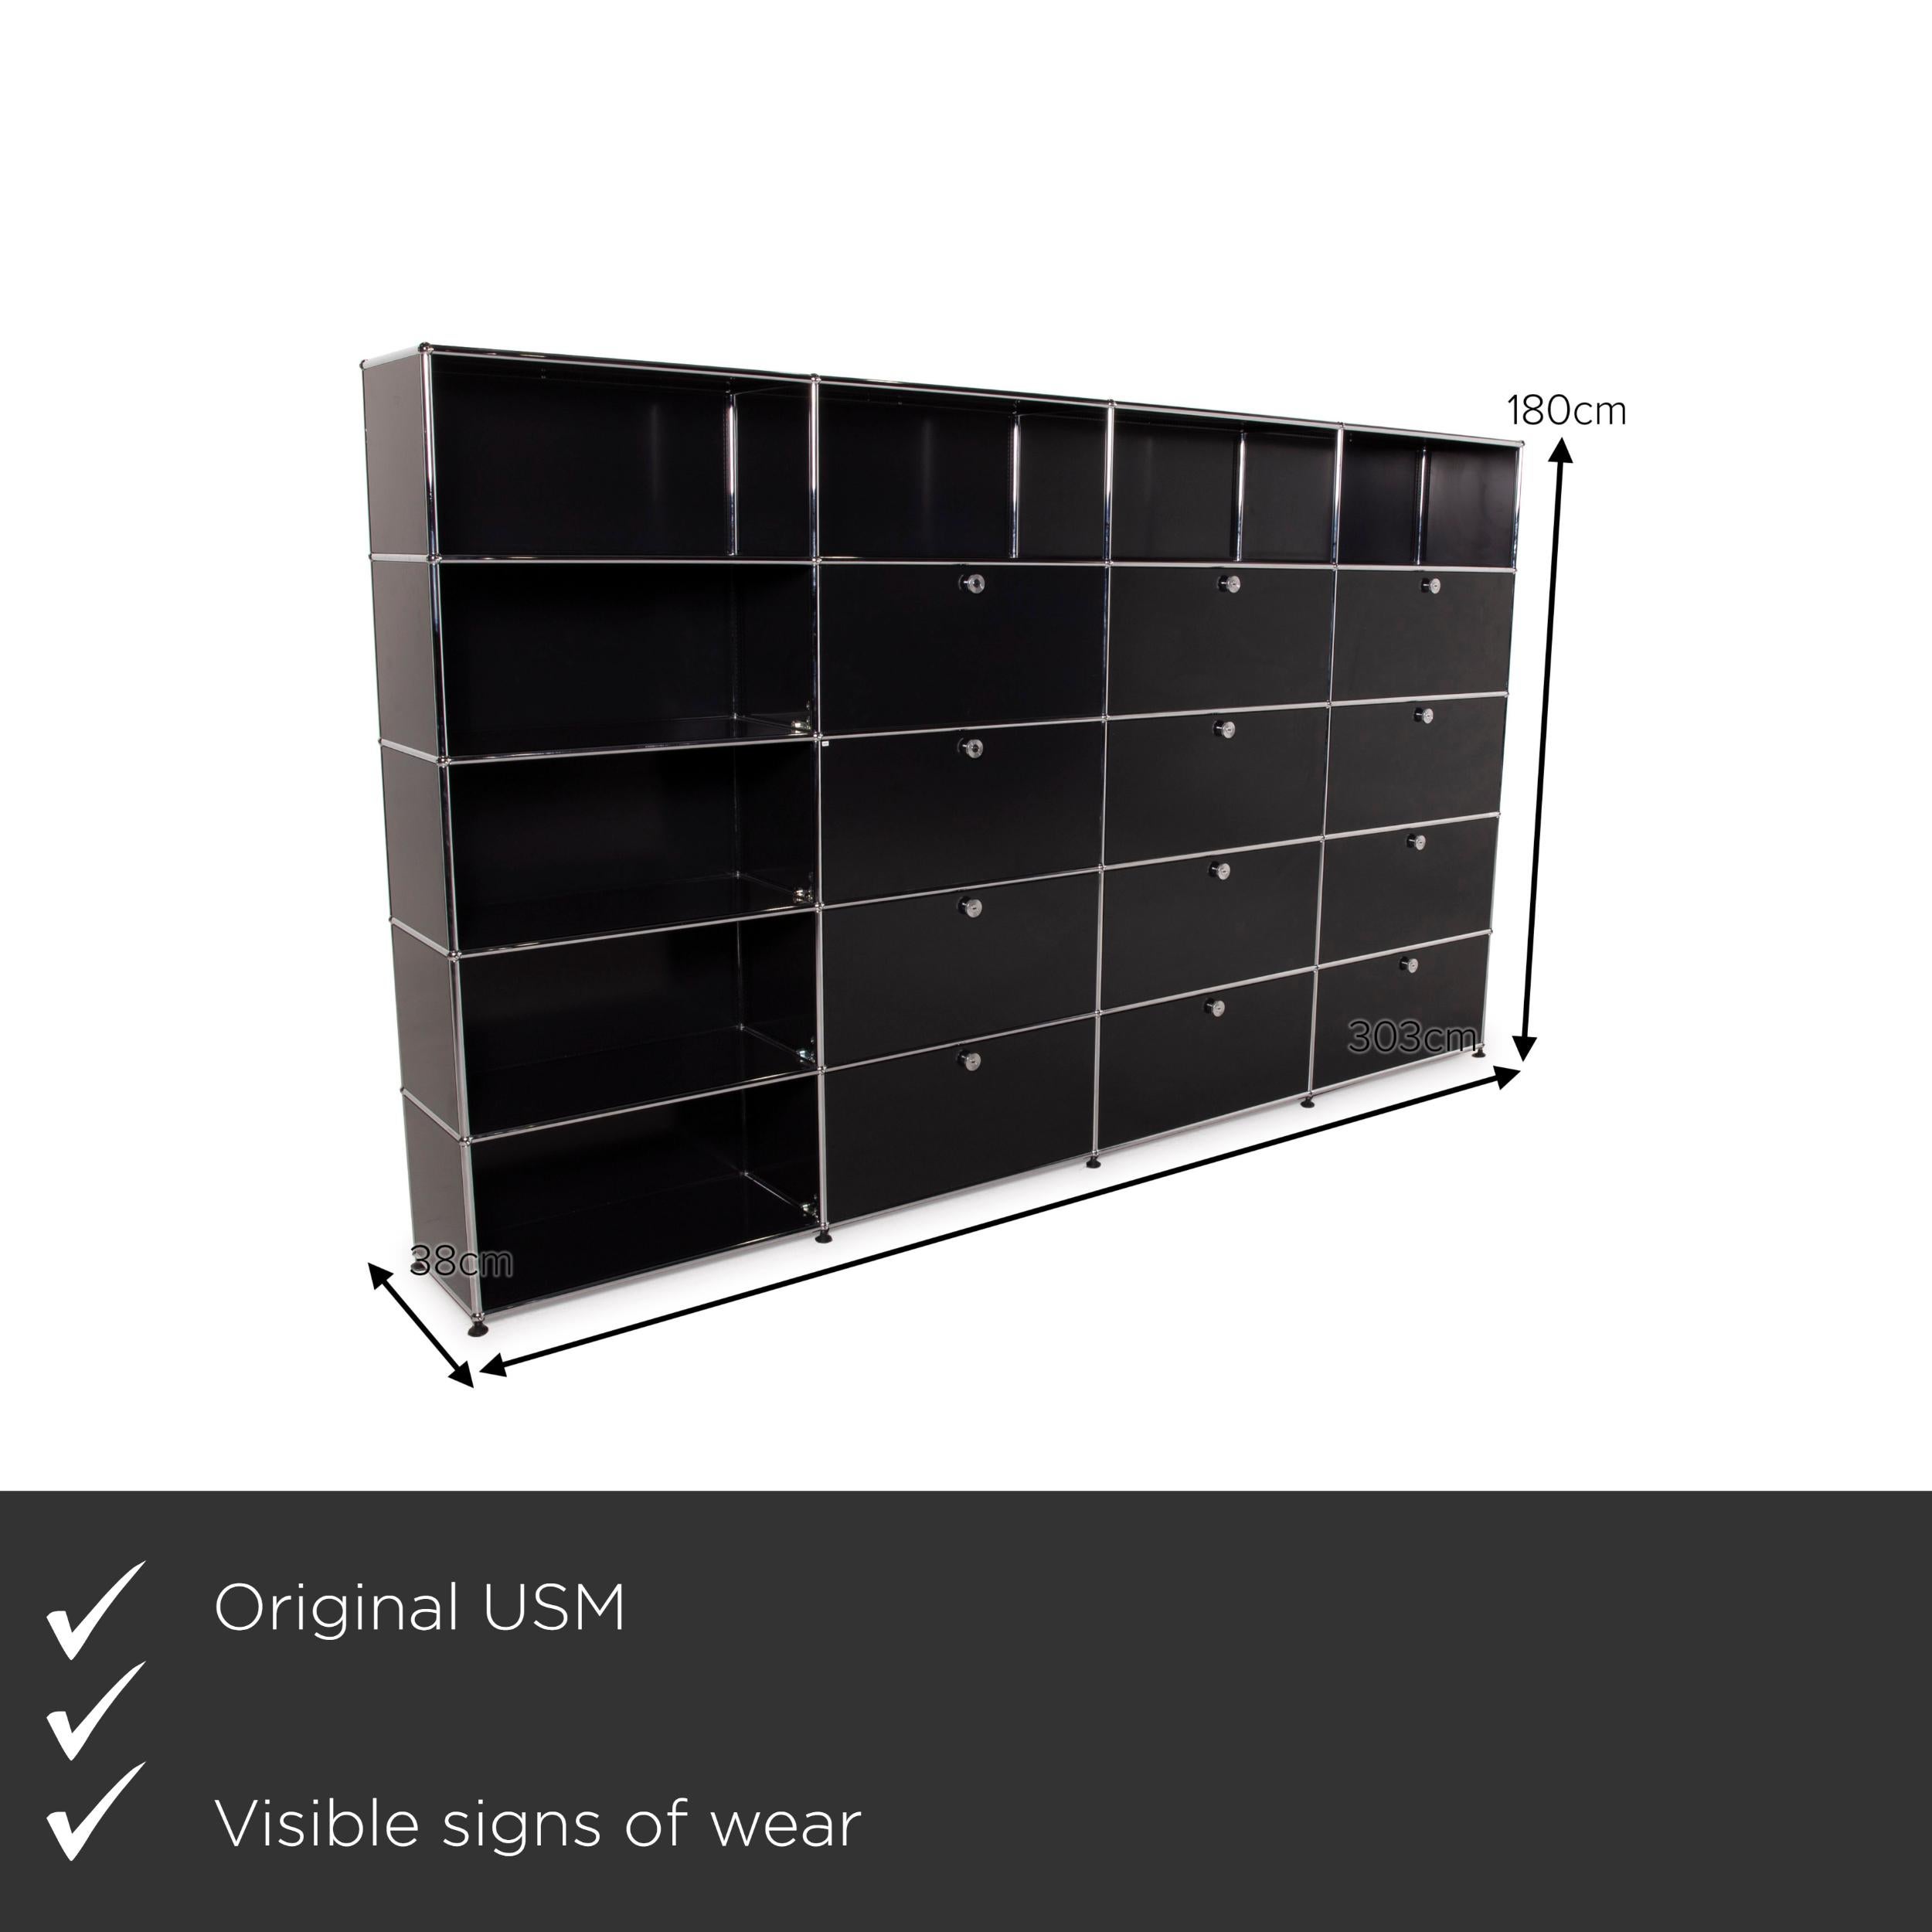 We present to you an USM Haller metal wall unit black shelf 4x5 compartments office.
 
 

 Product measurements in centimeters:
 

Depth: 37
Width: 303
Height: 180.
 
 
 
 
 